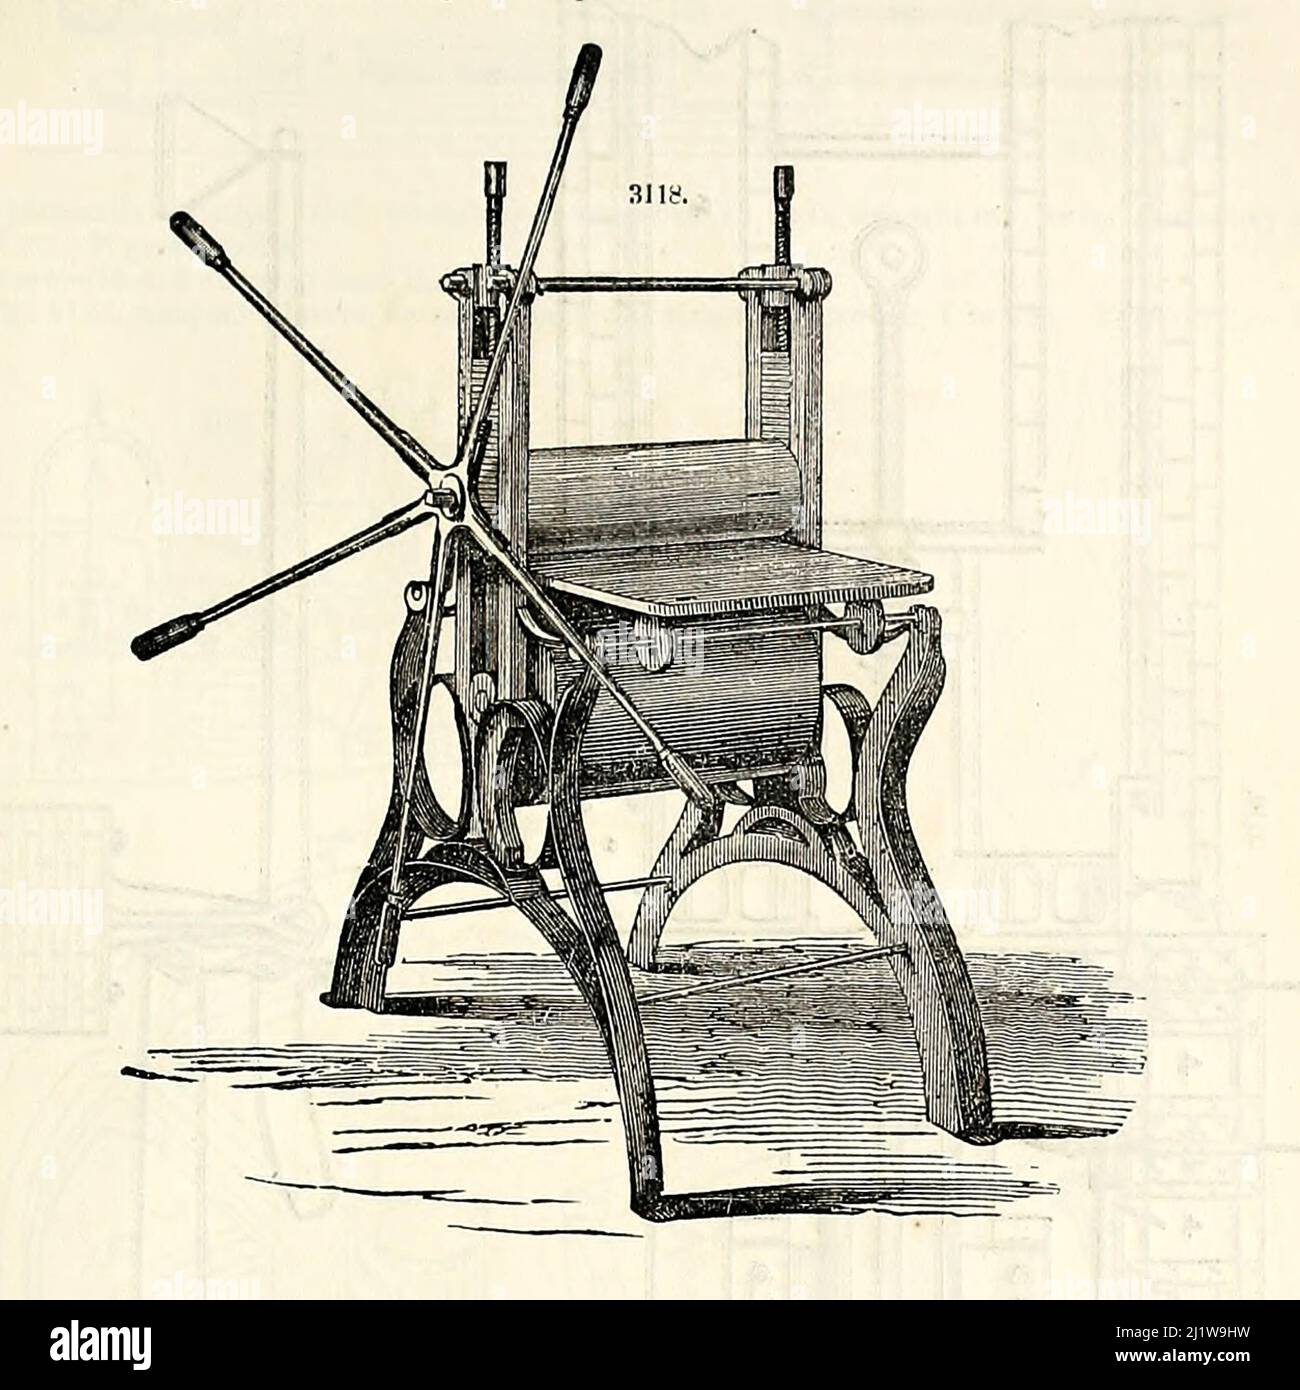 Treadle-operated 'Minerva' platen printing press made by H. S.